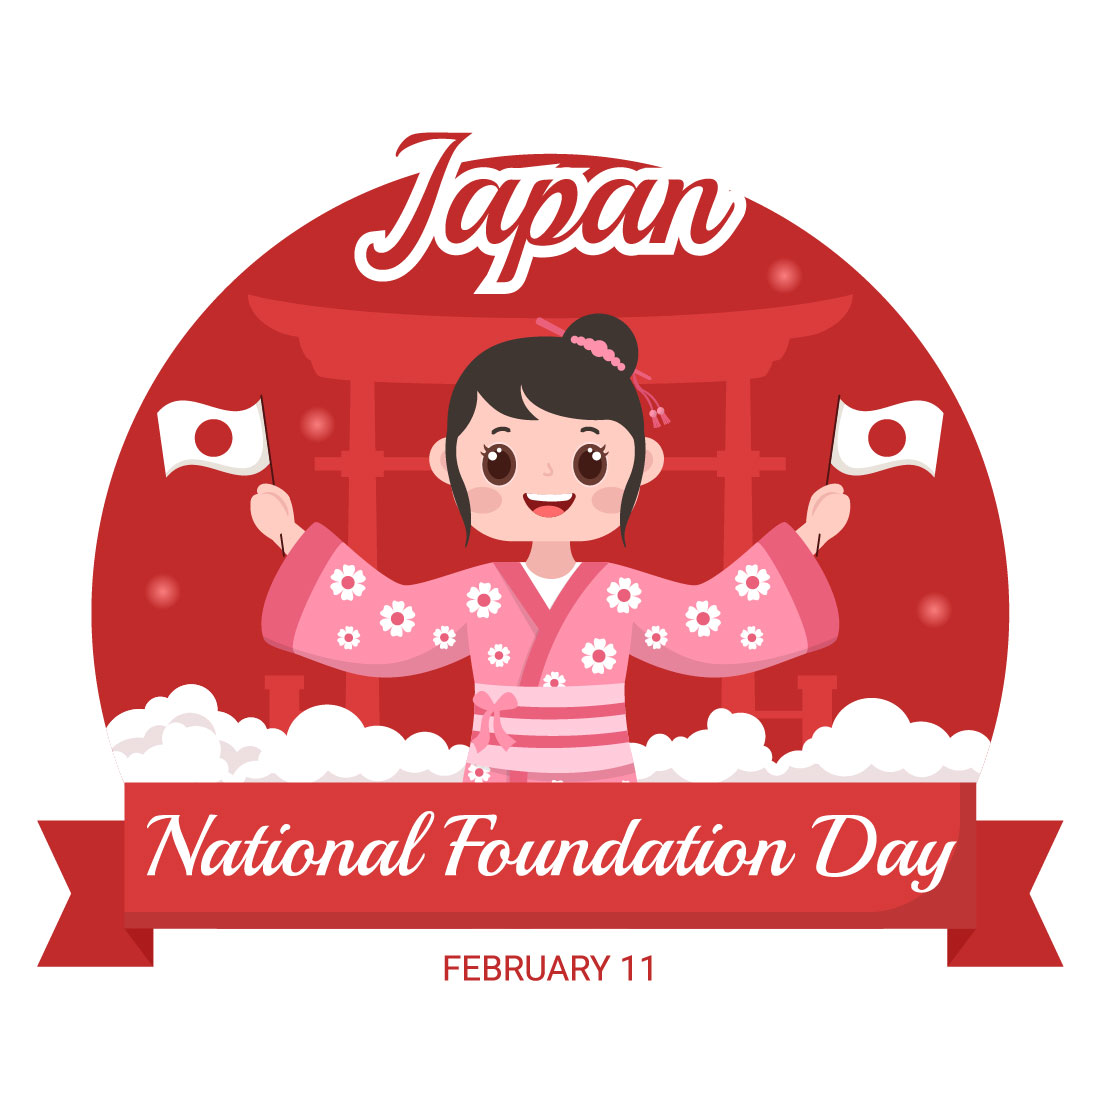 16 Japan National Foundation Day Illustration created by.